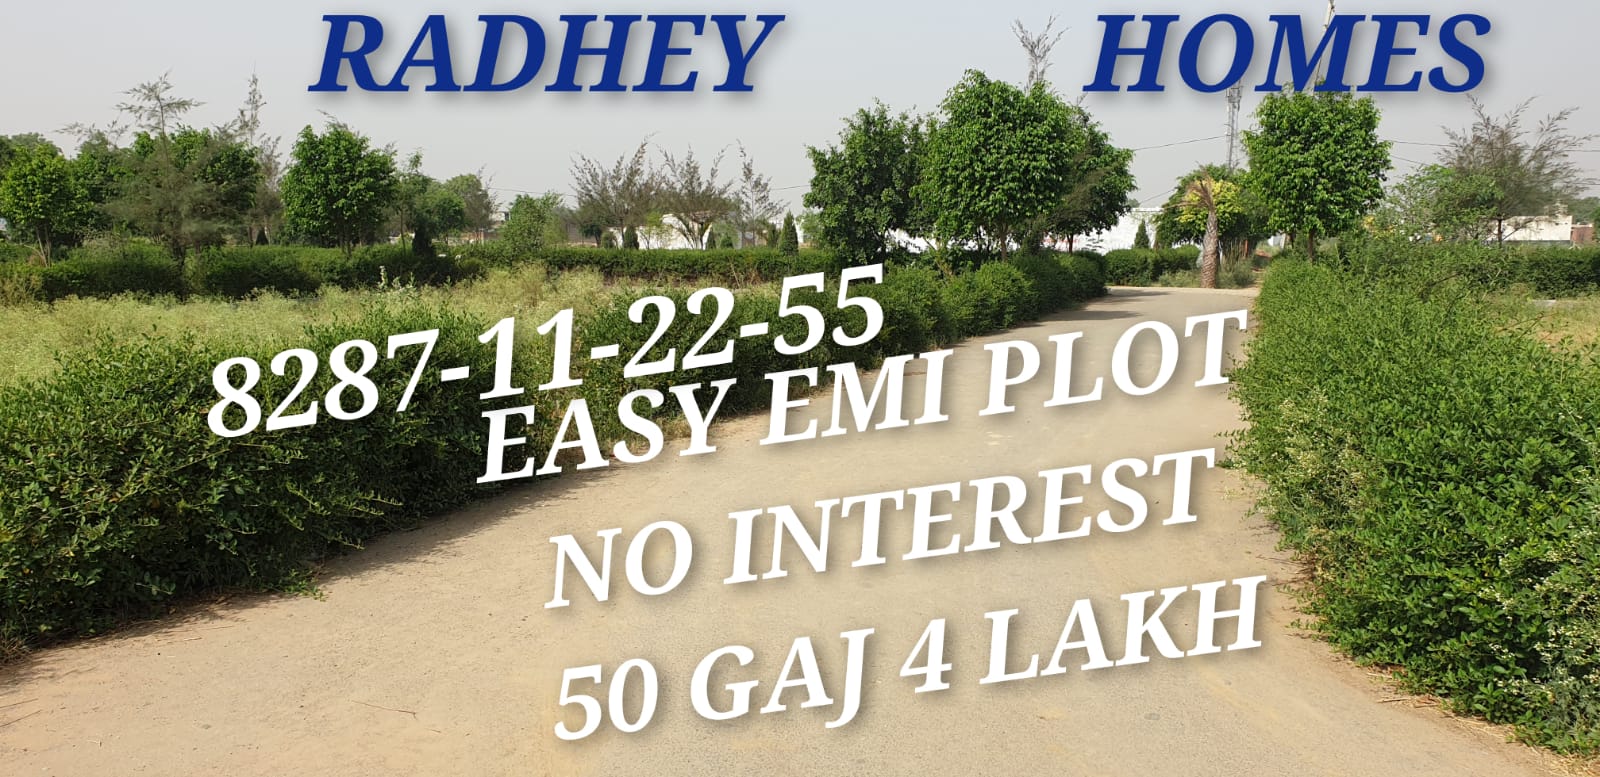 80 Sq Yards Plots & Land for Sale in Sector 28